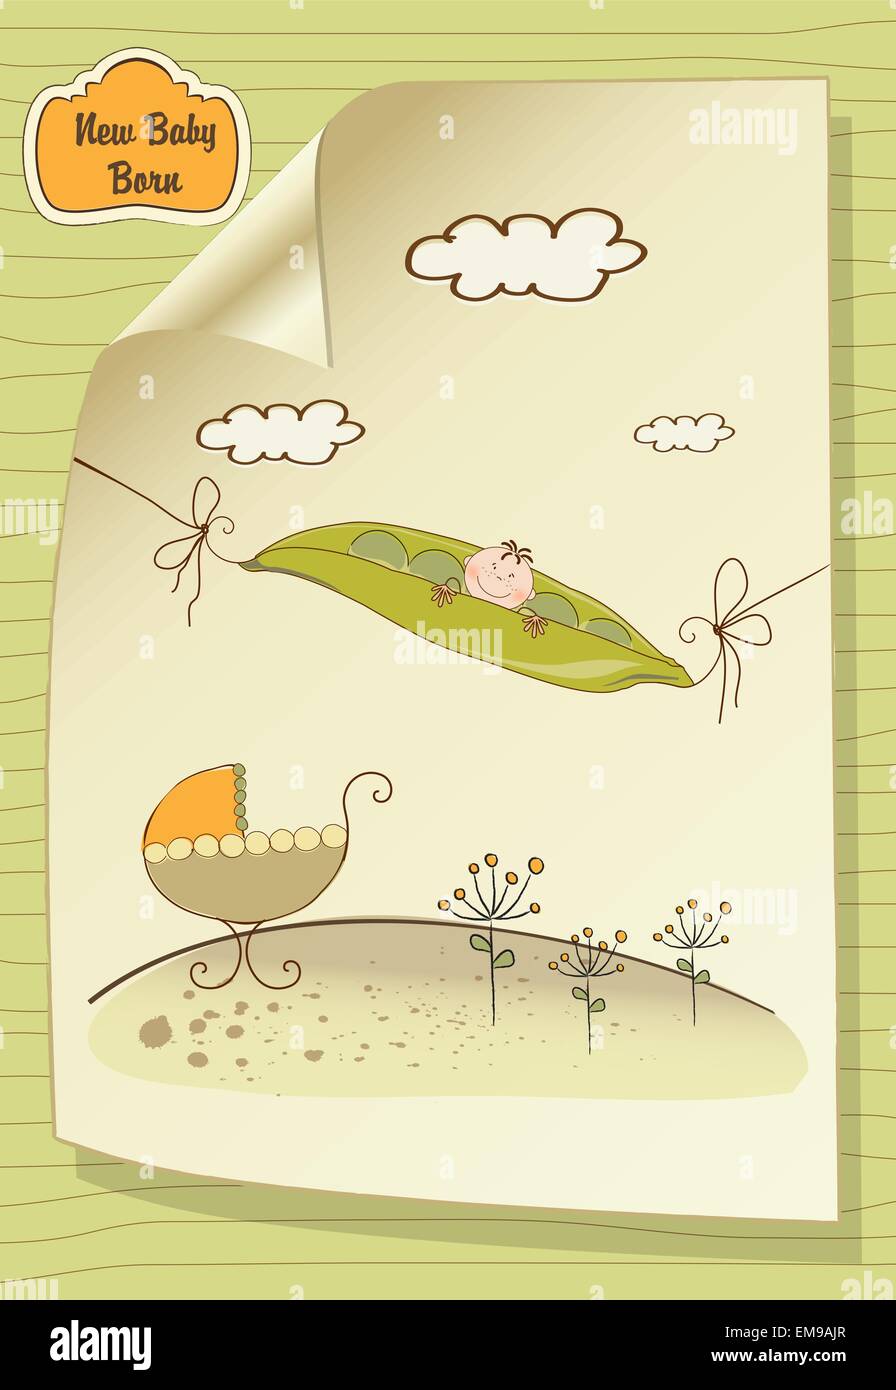 little boy sleeping in a pea been, baby announcement card Stock Vector